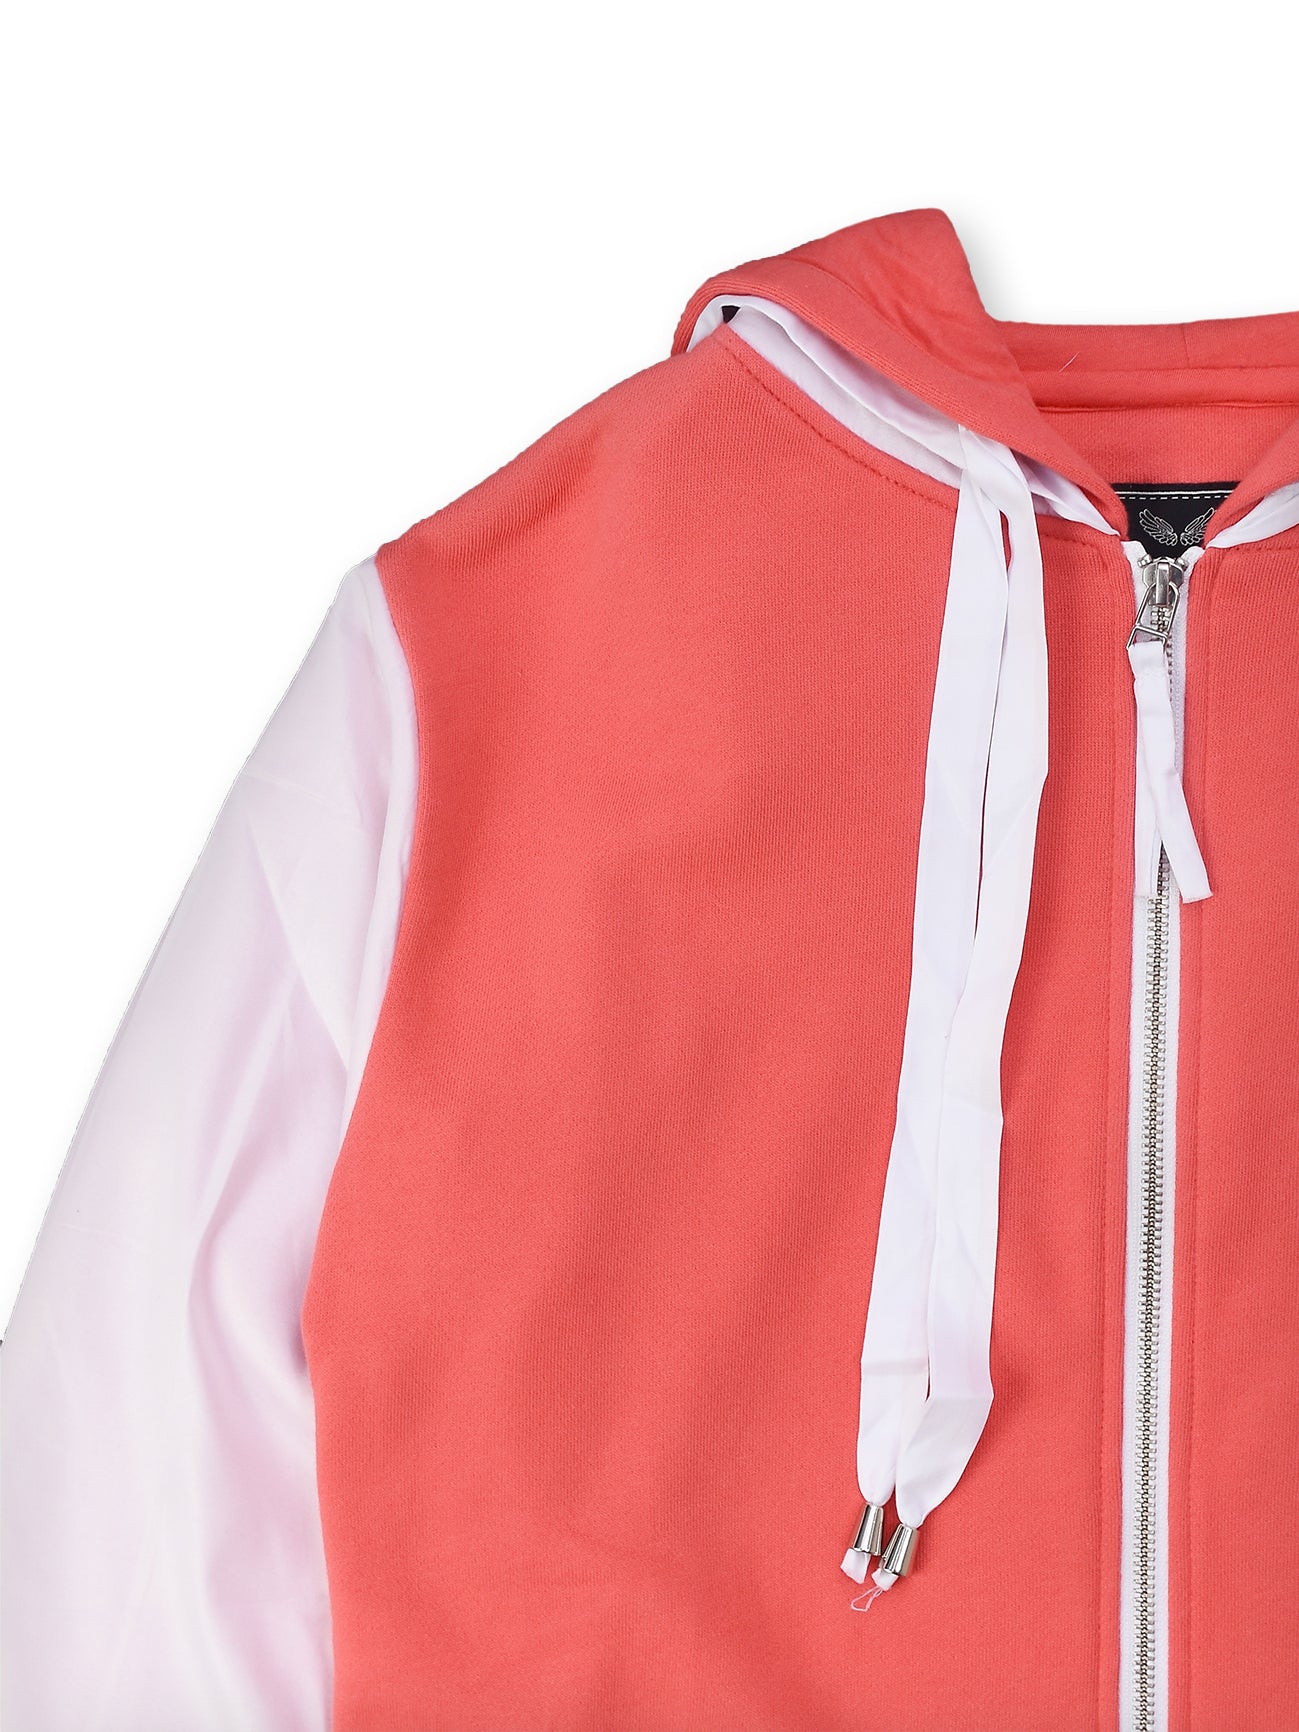 Coral And White Satin Zip-Up Hoodie